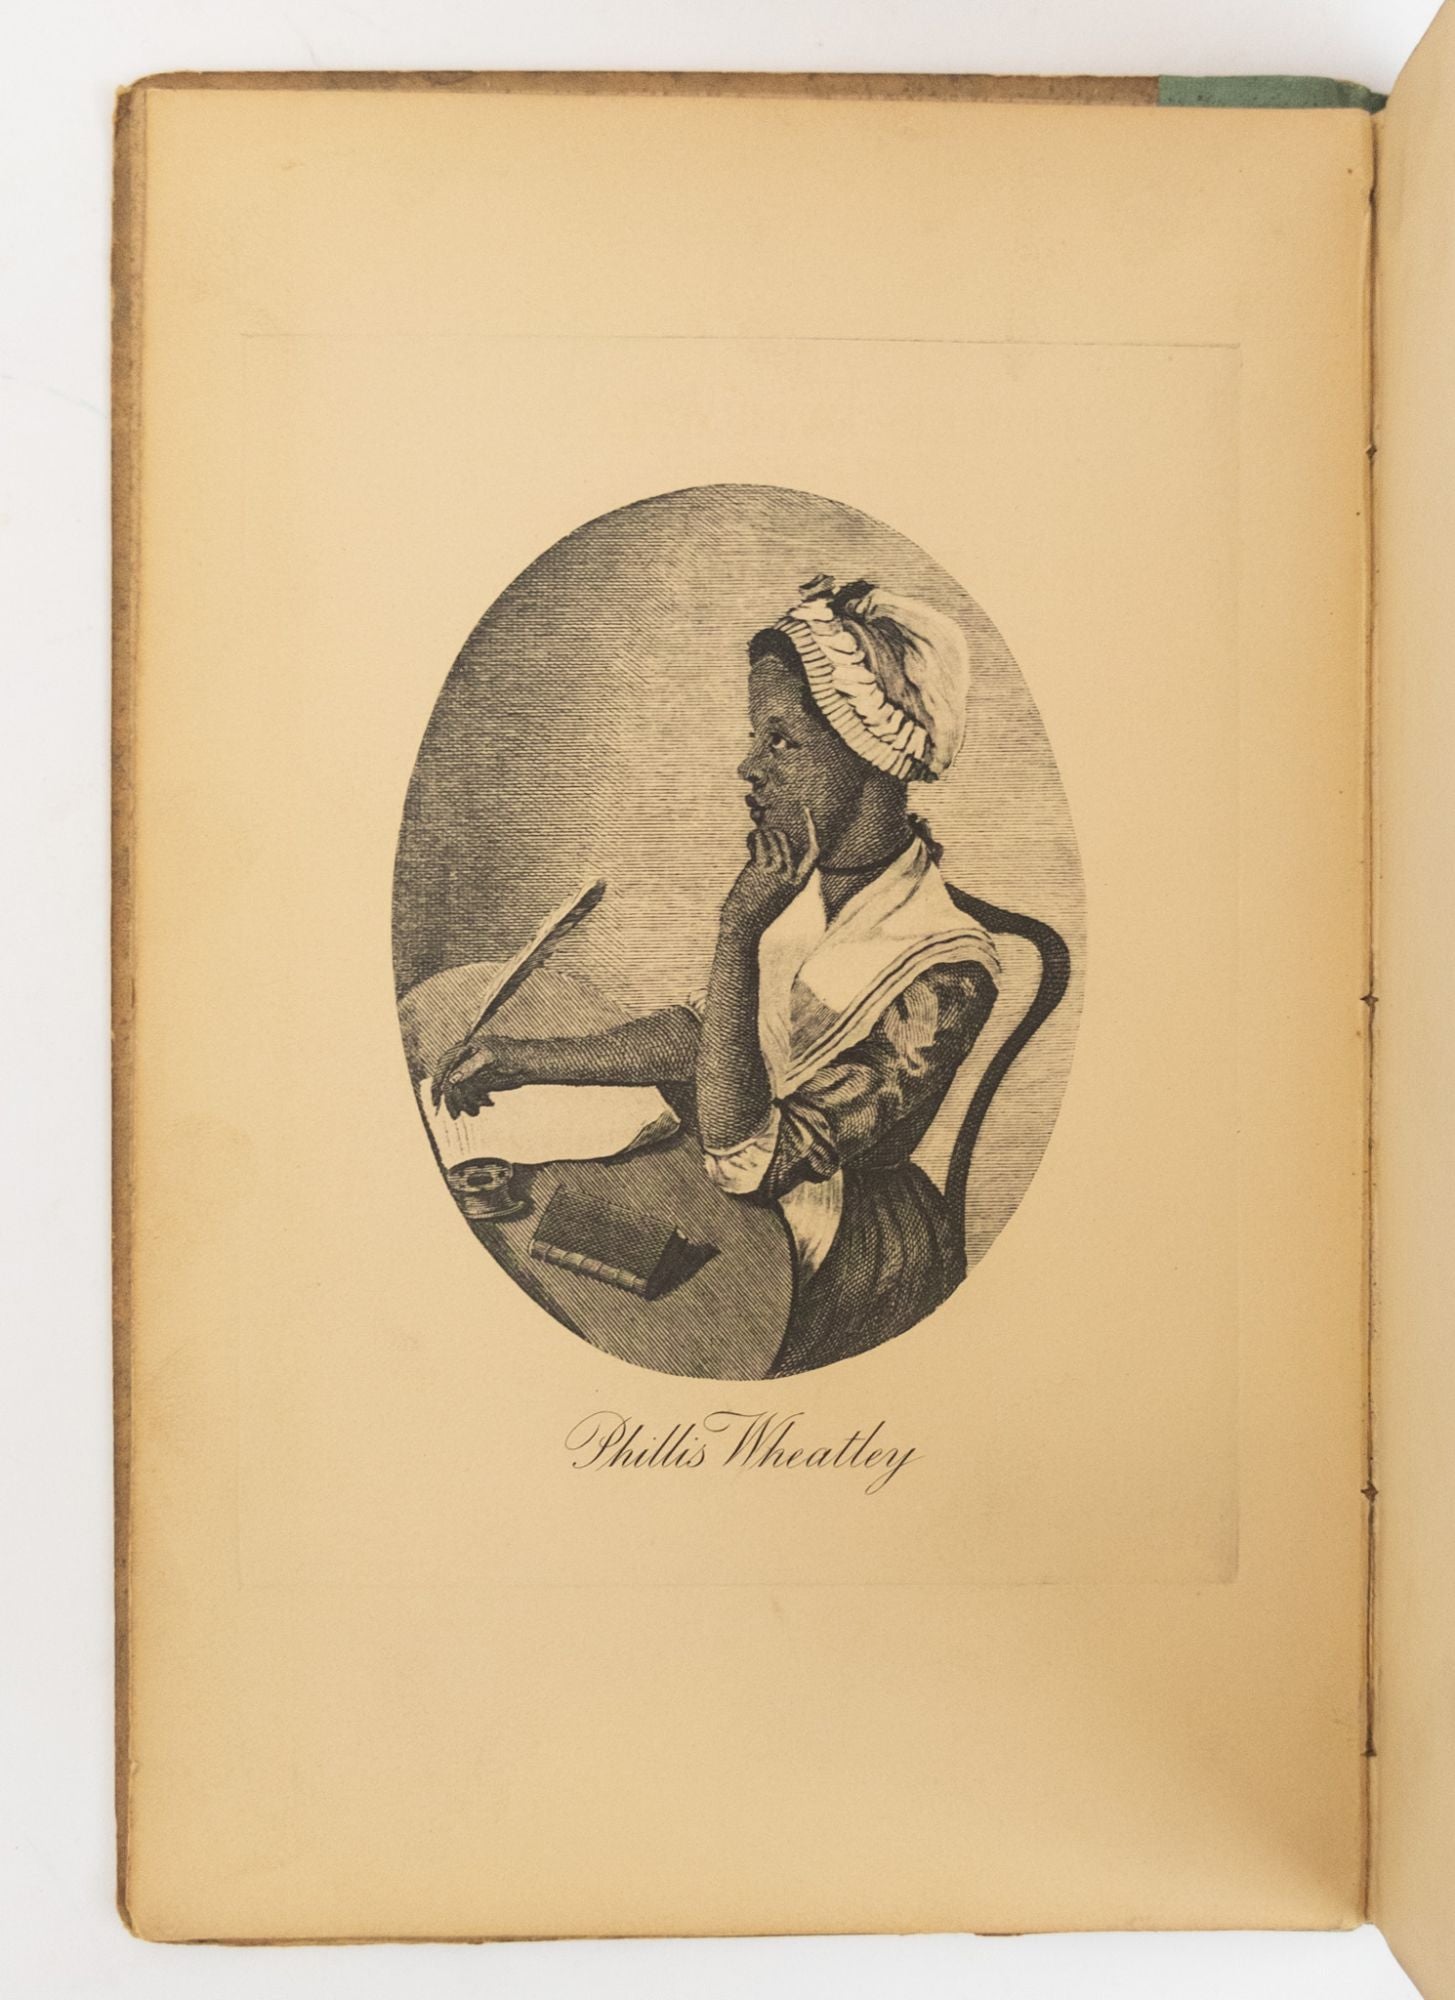 Product Image for PHILLIS WHEATLEY: POEMS AND LETTERS - FIRST COLLECTED EDITION